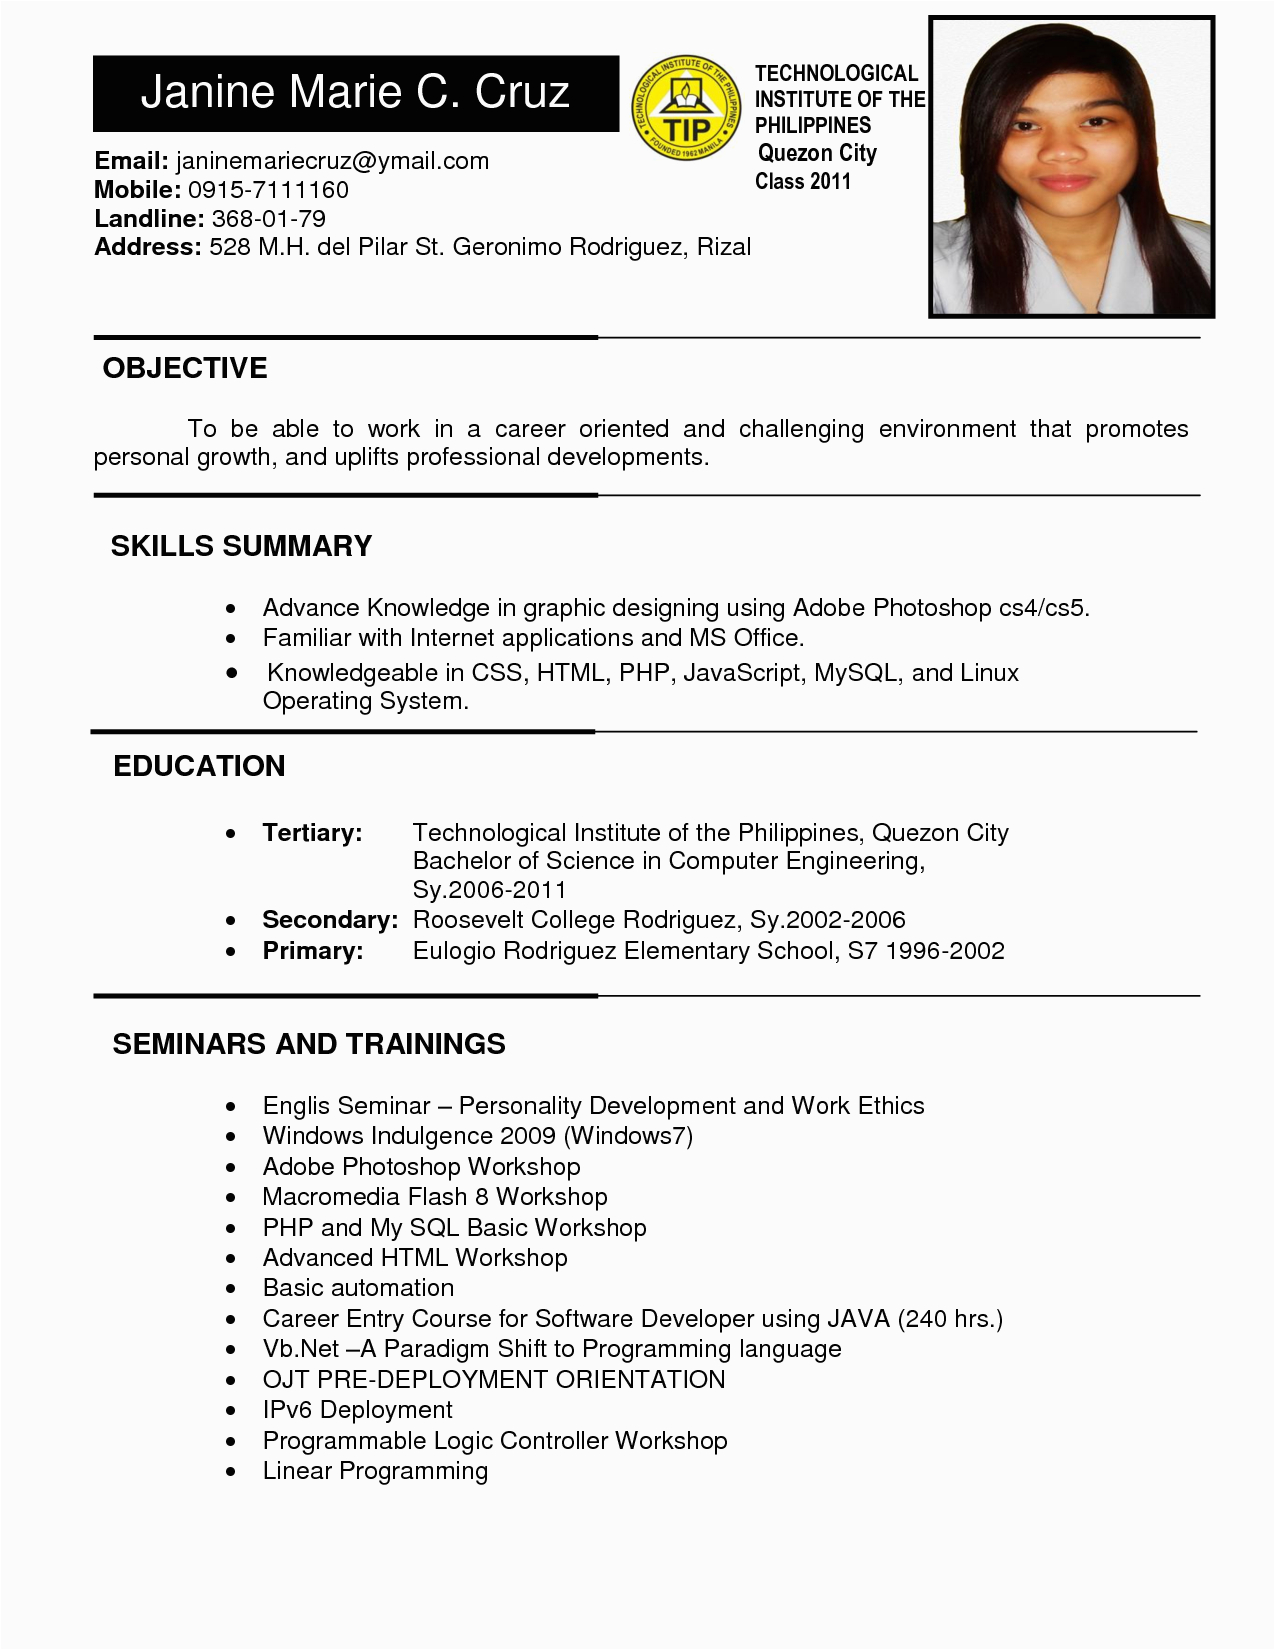 Sample Resume for Government Employee Philippines Sample Resume format for Job Application Google Search